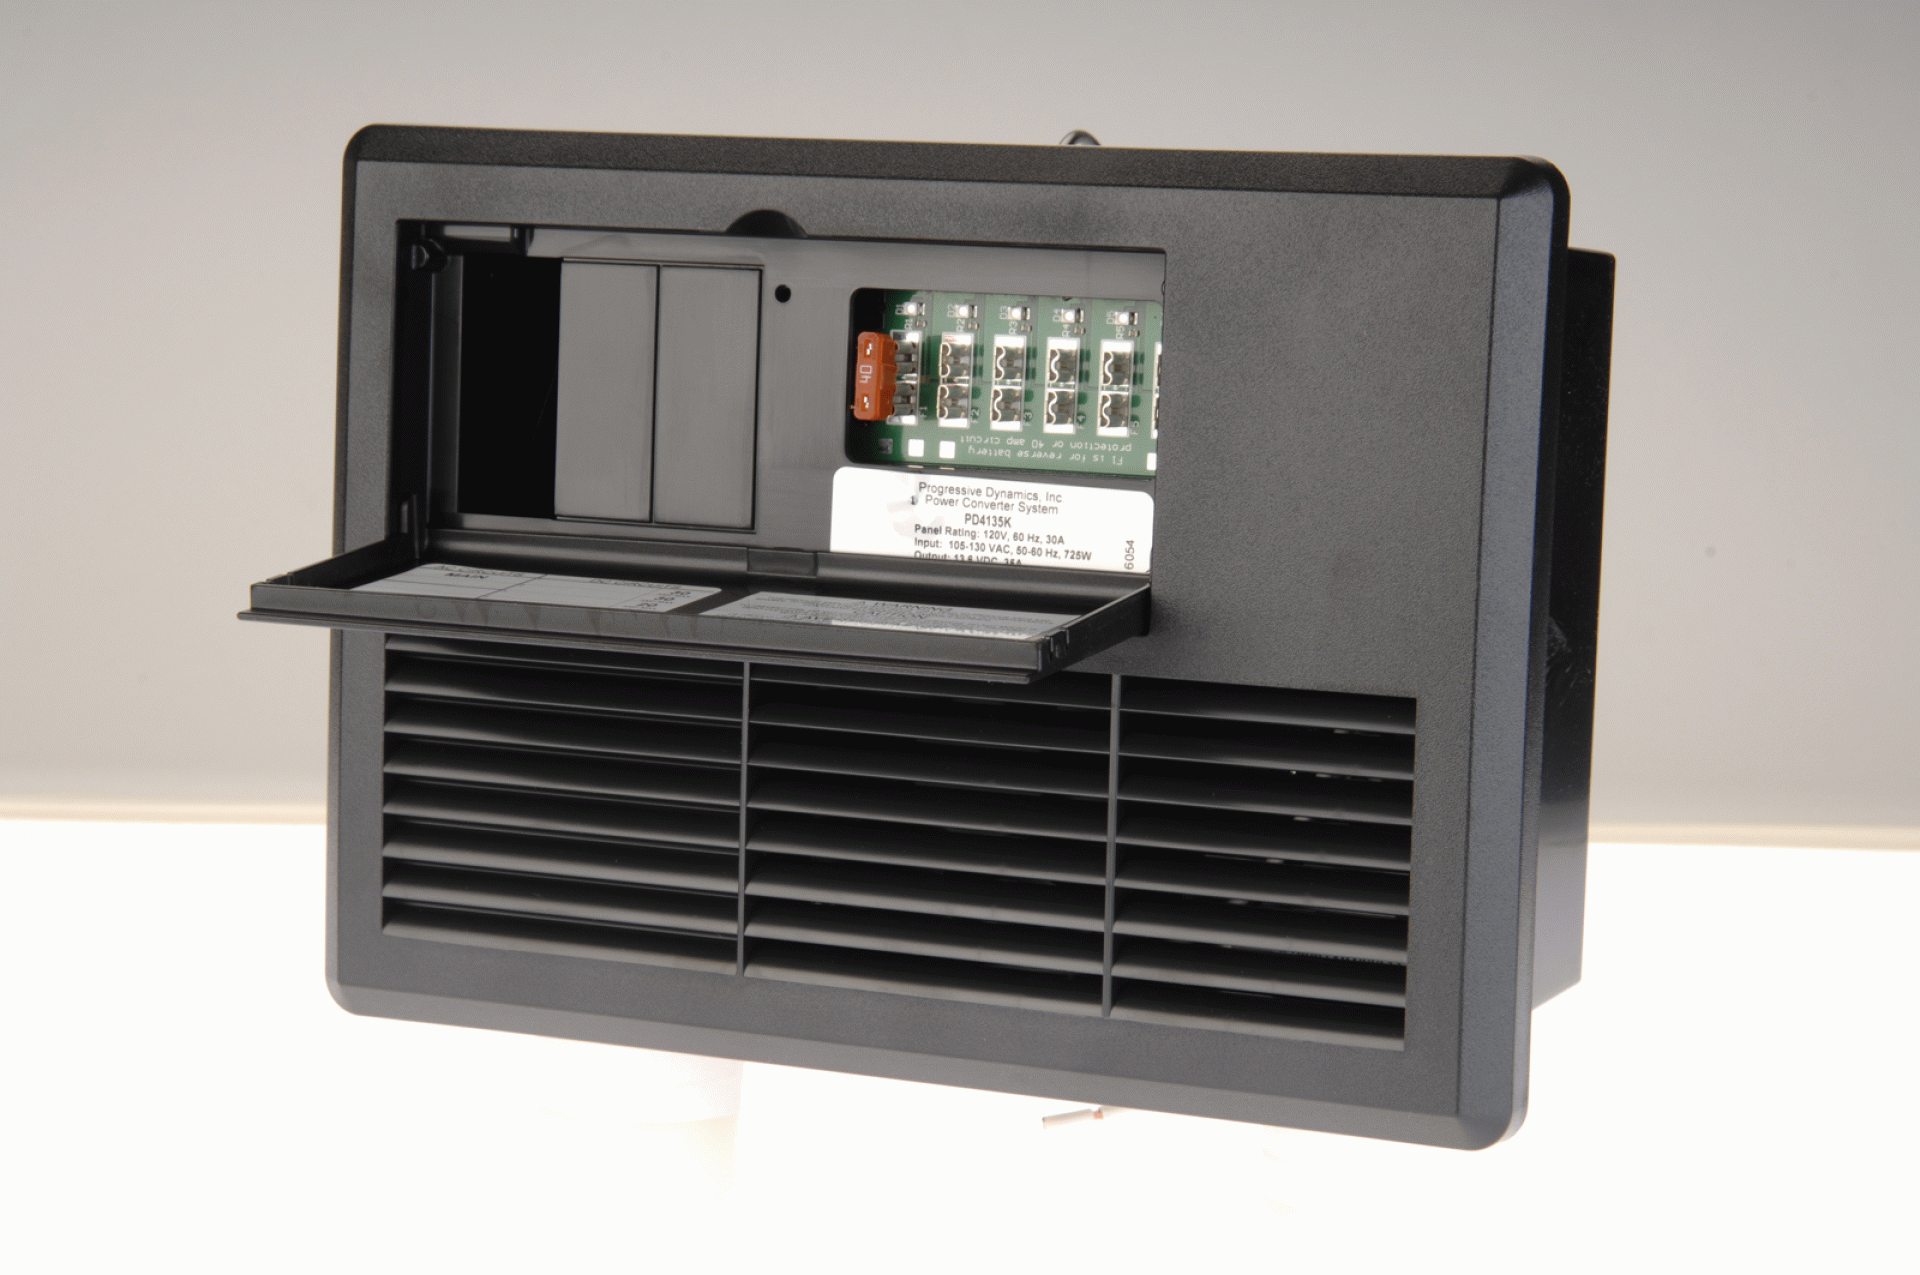 PROGRESSIVE DYNAMICS INC | PD4135KW2BV | All in one Converter/Charger w/ built-in charge wizard.